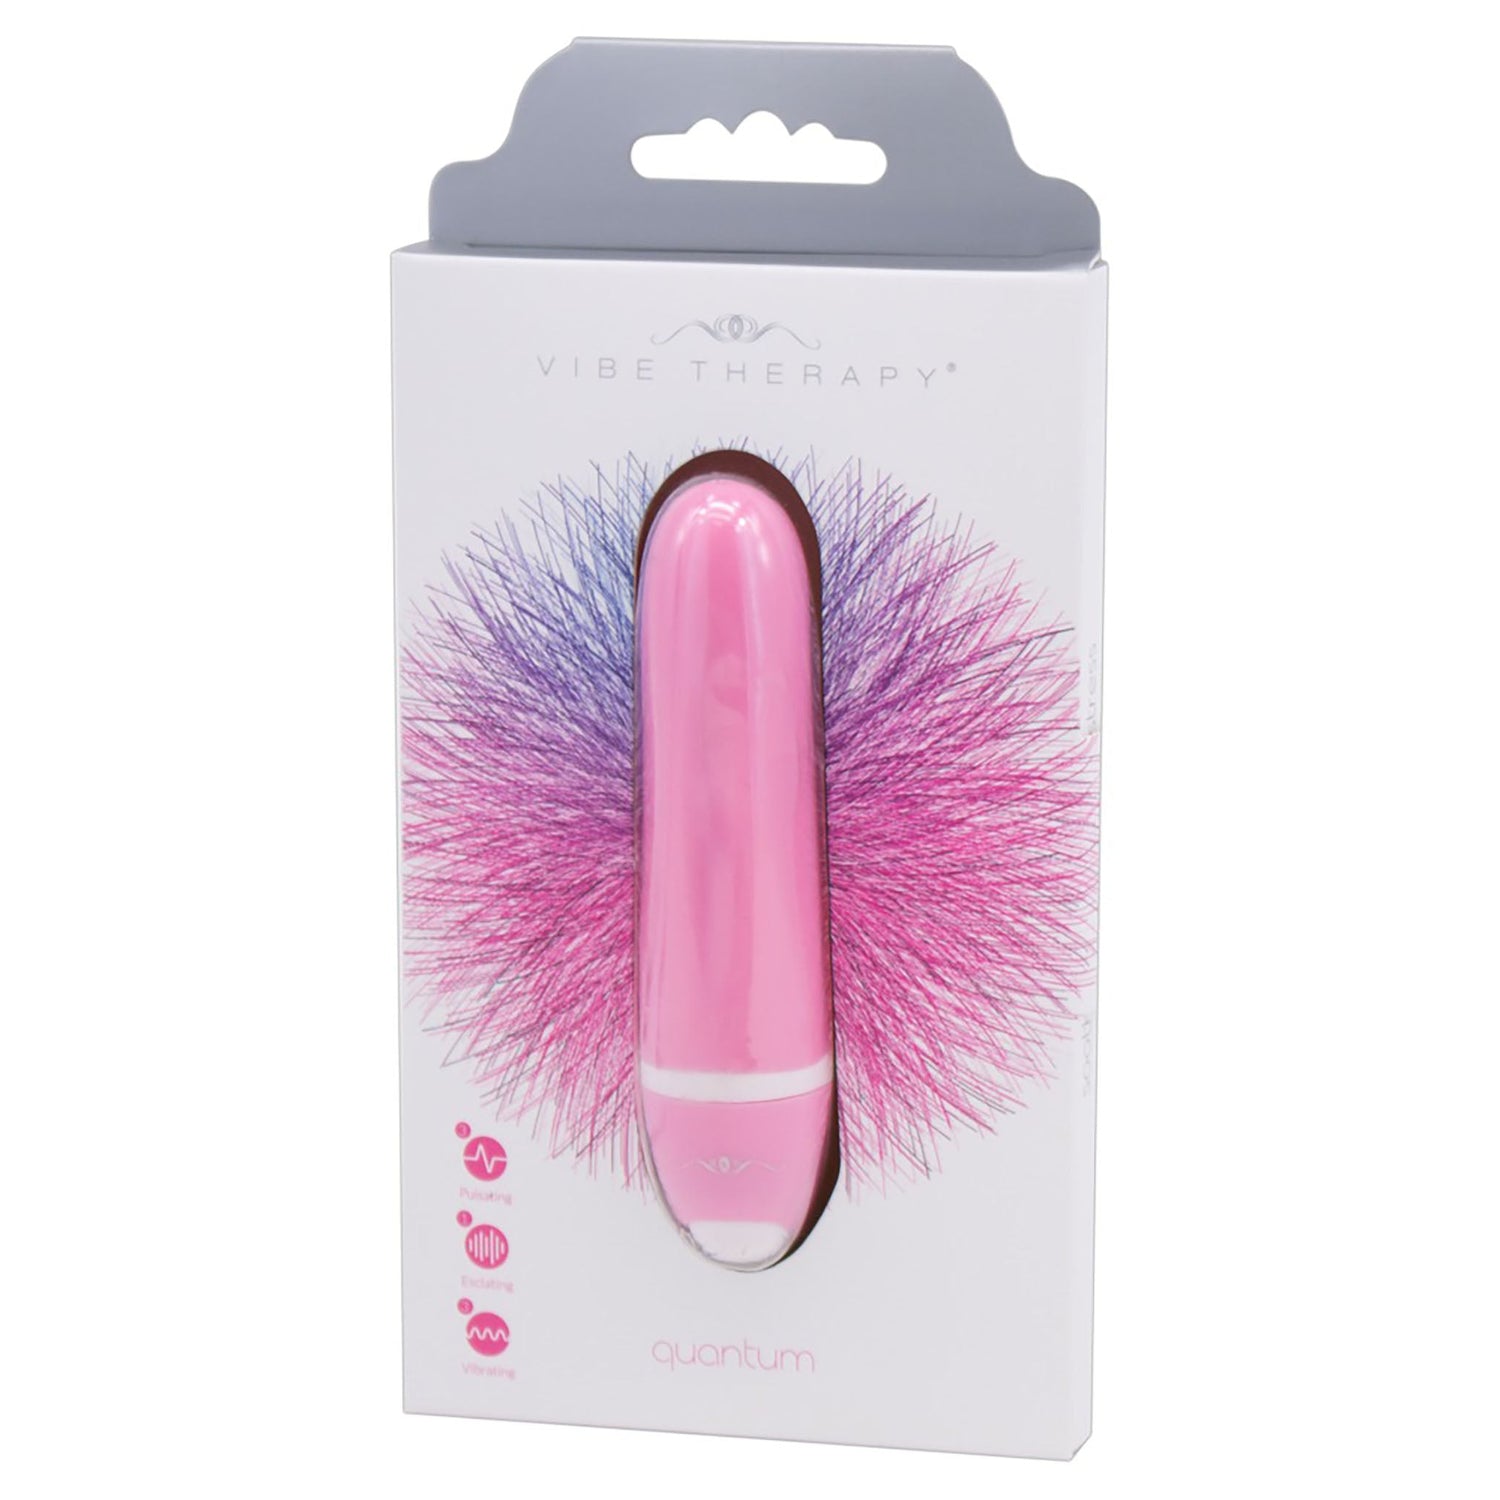 Vibe Therapy Quantum Minivibrator in pink in Verpackung